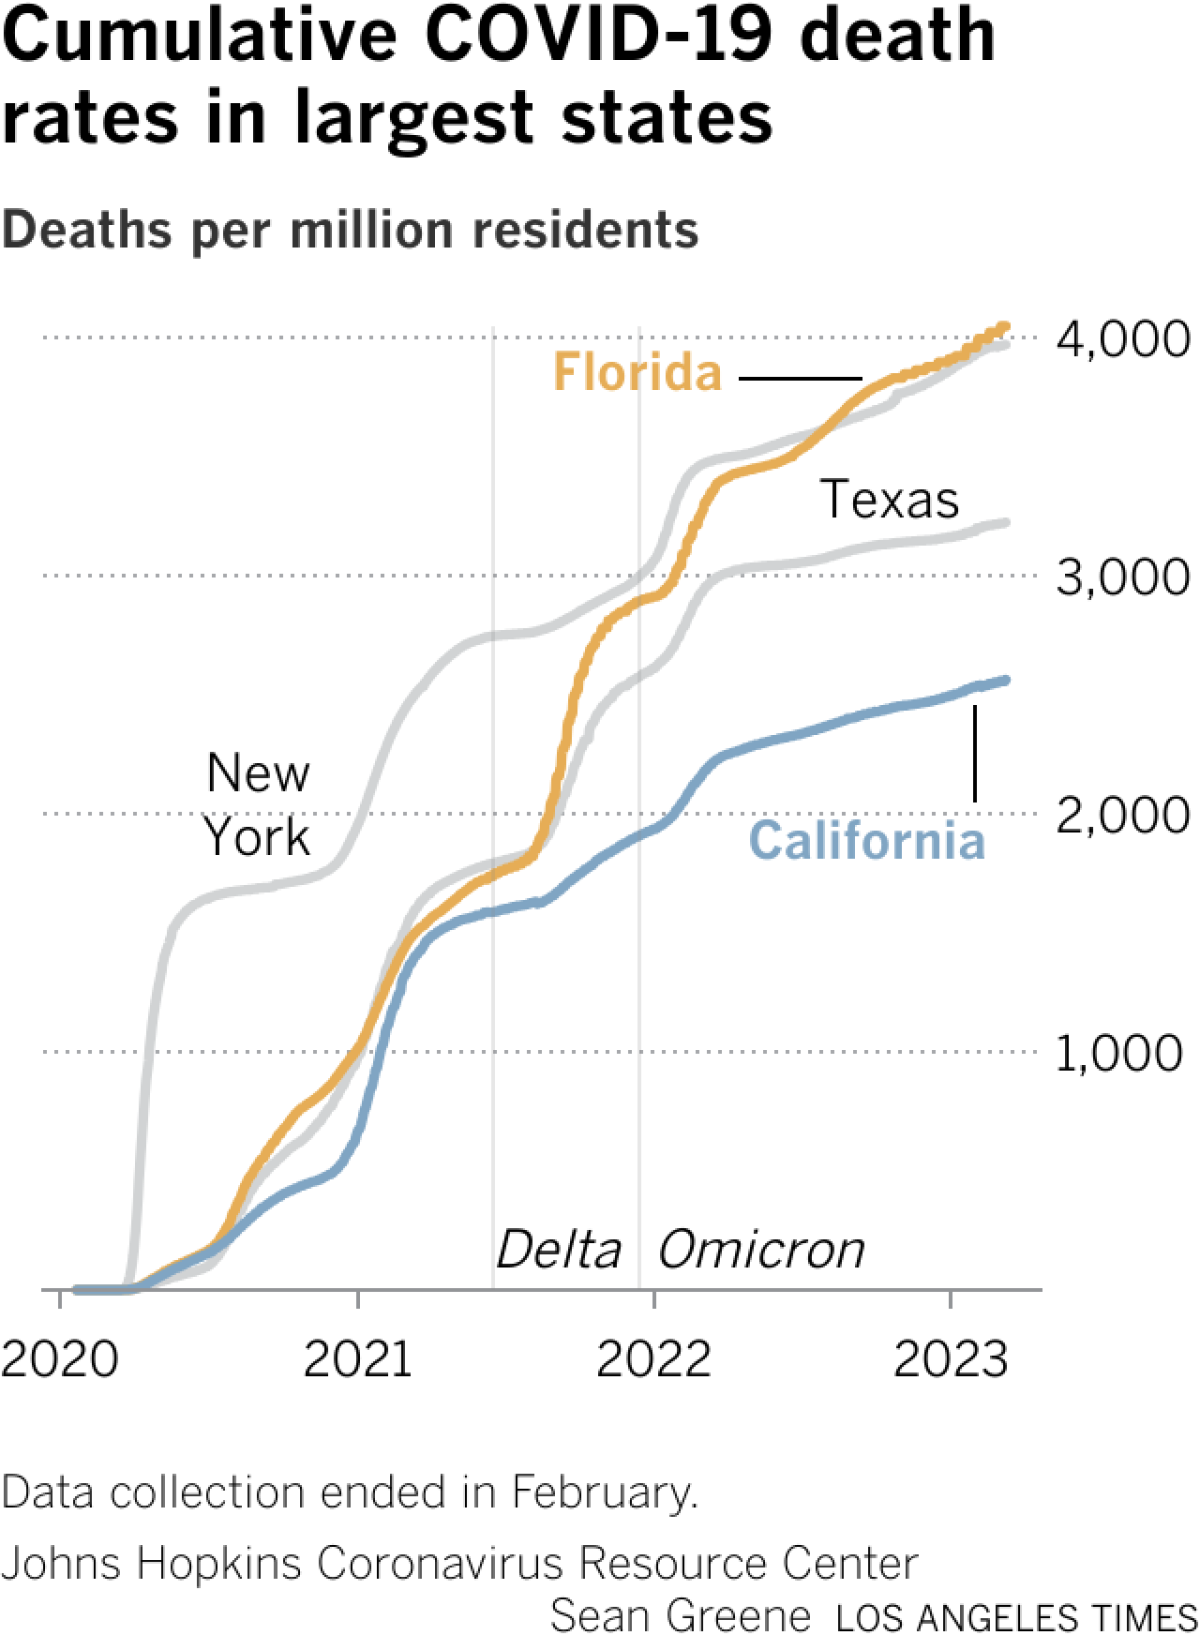 Line chart comparing COVID-19 death rates in California, Florida, New York and Texas. The Florida rate surged significantly higher than California in mid-2021.